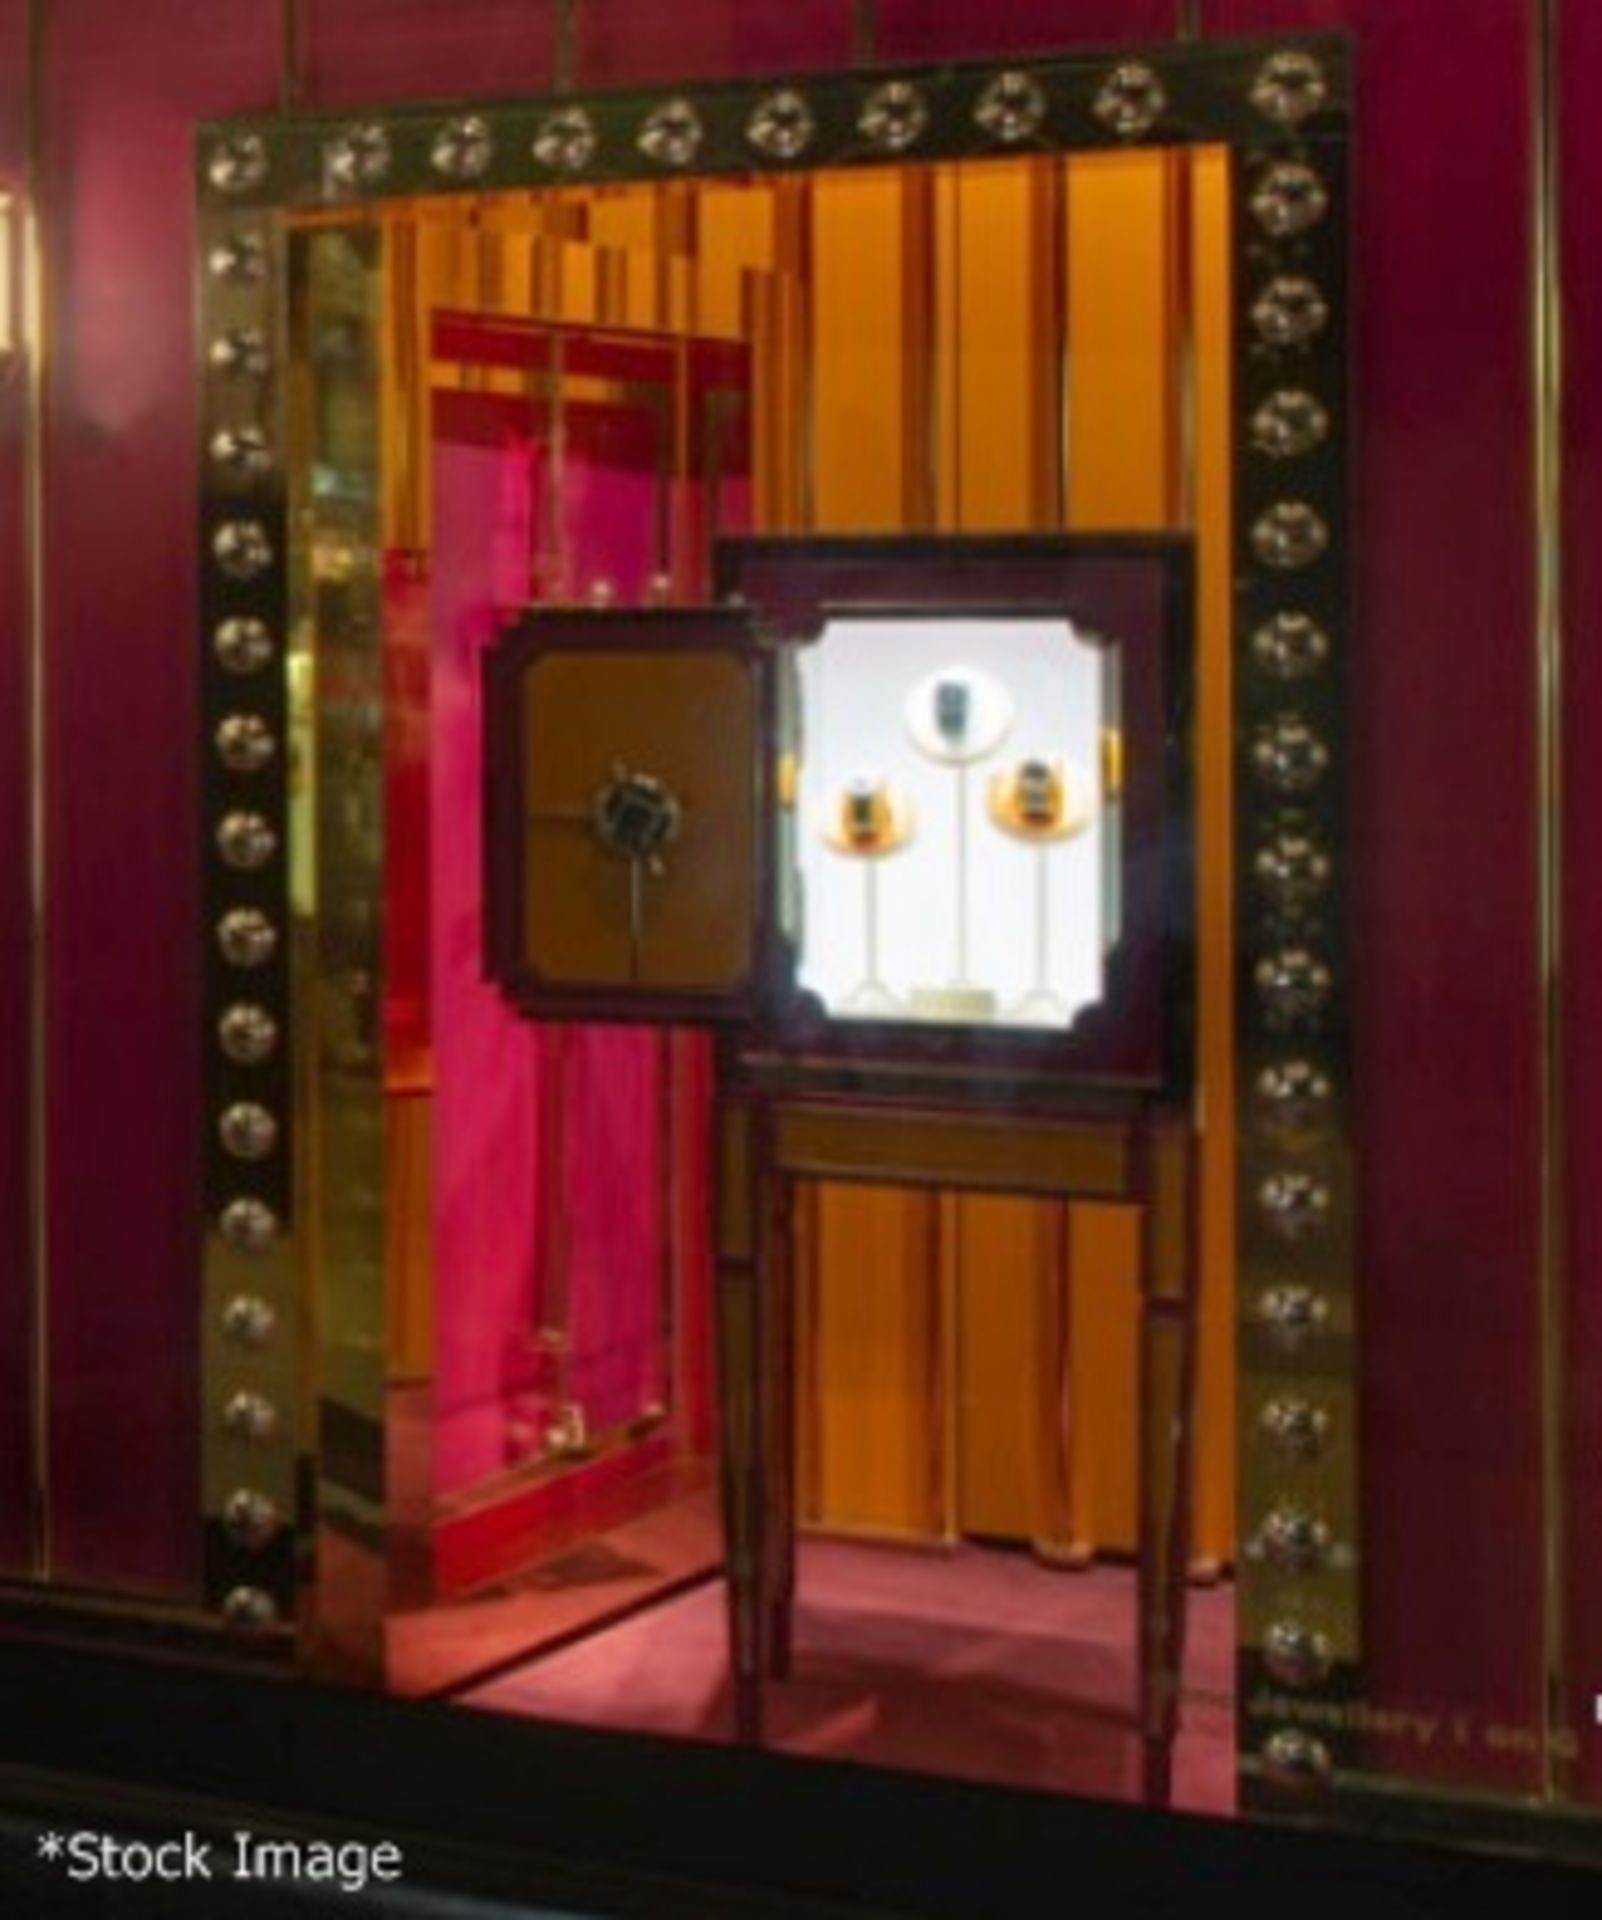 2 x Specially Commissioned Bank Vault Safe-style Illuminated Shop Display Dummy Props - Image 3 of 17